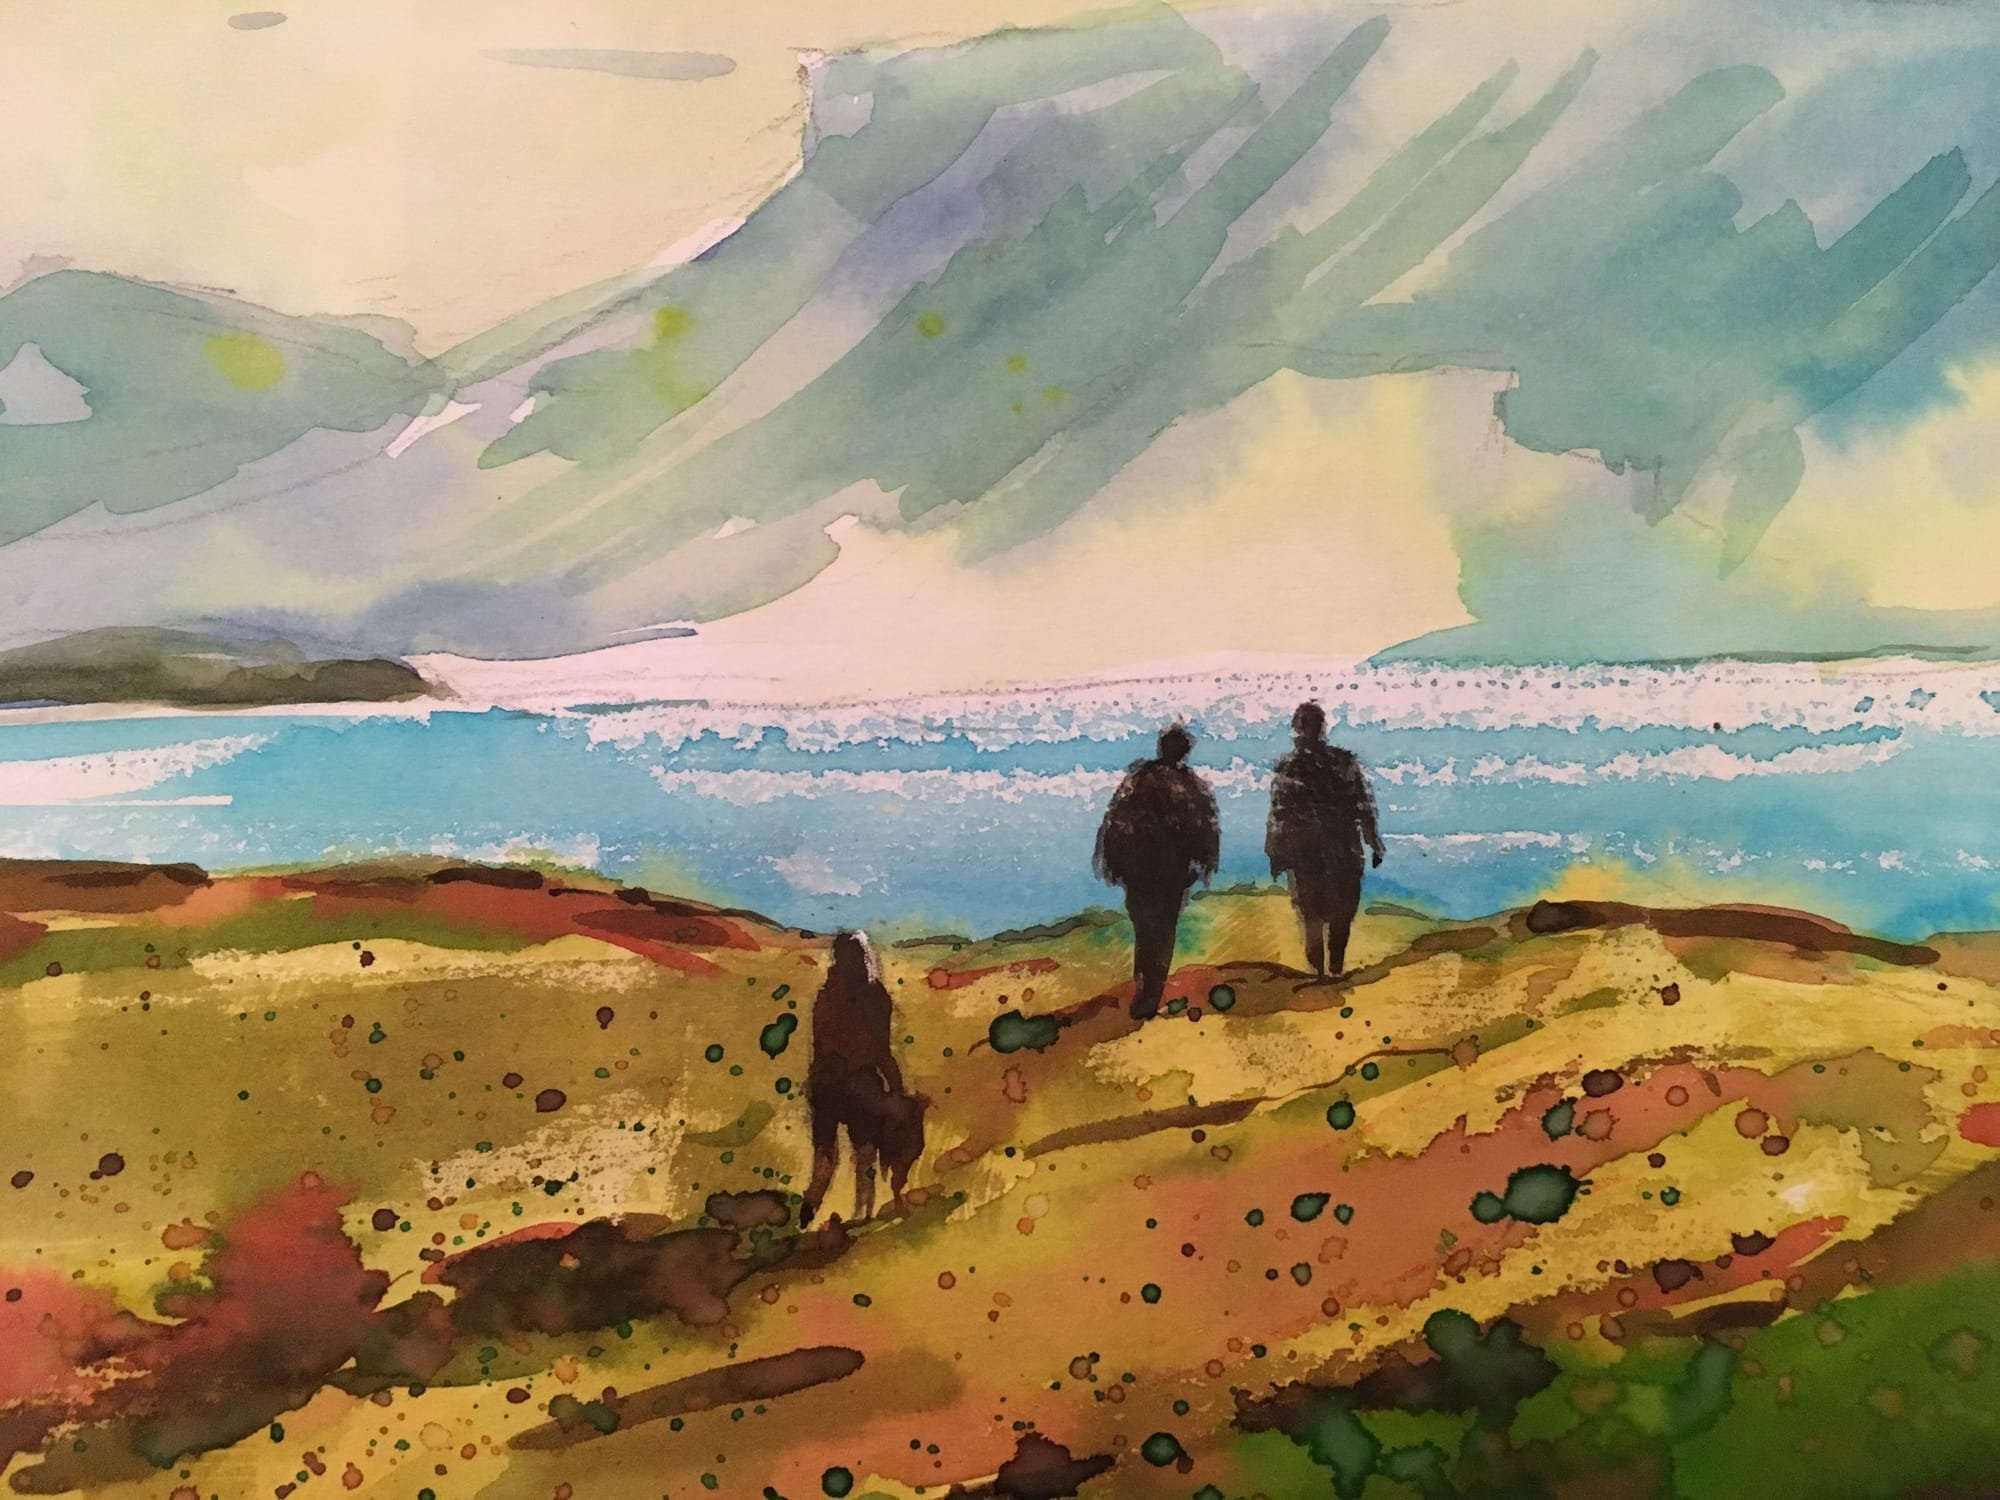 South west moors, Iona - Sketch